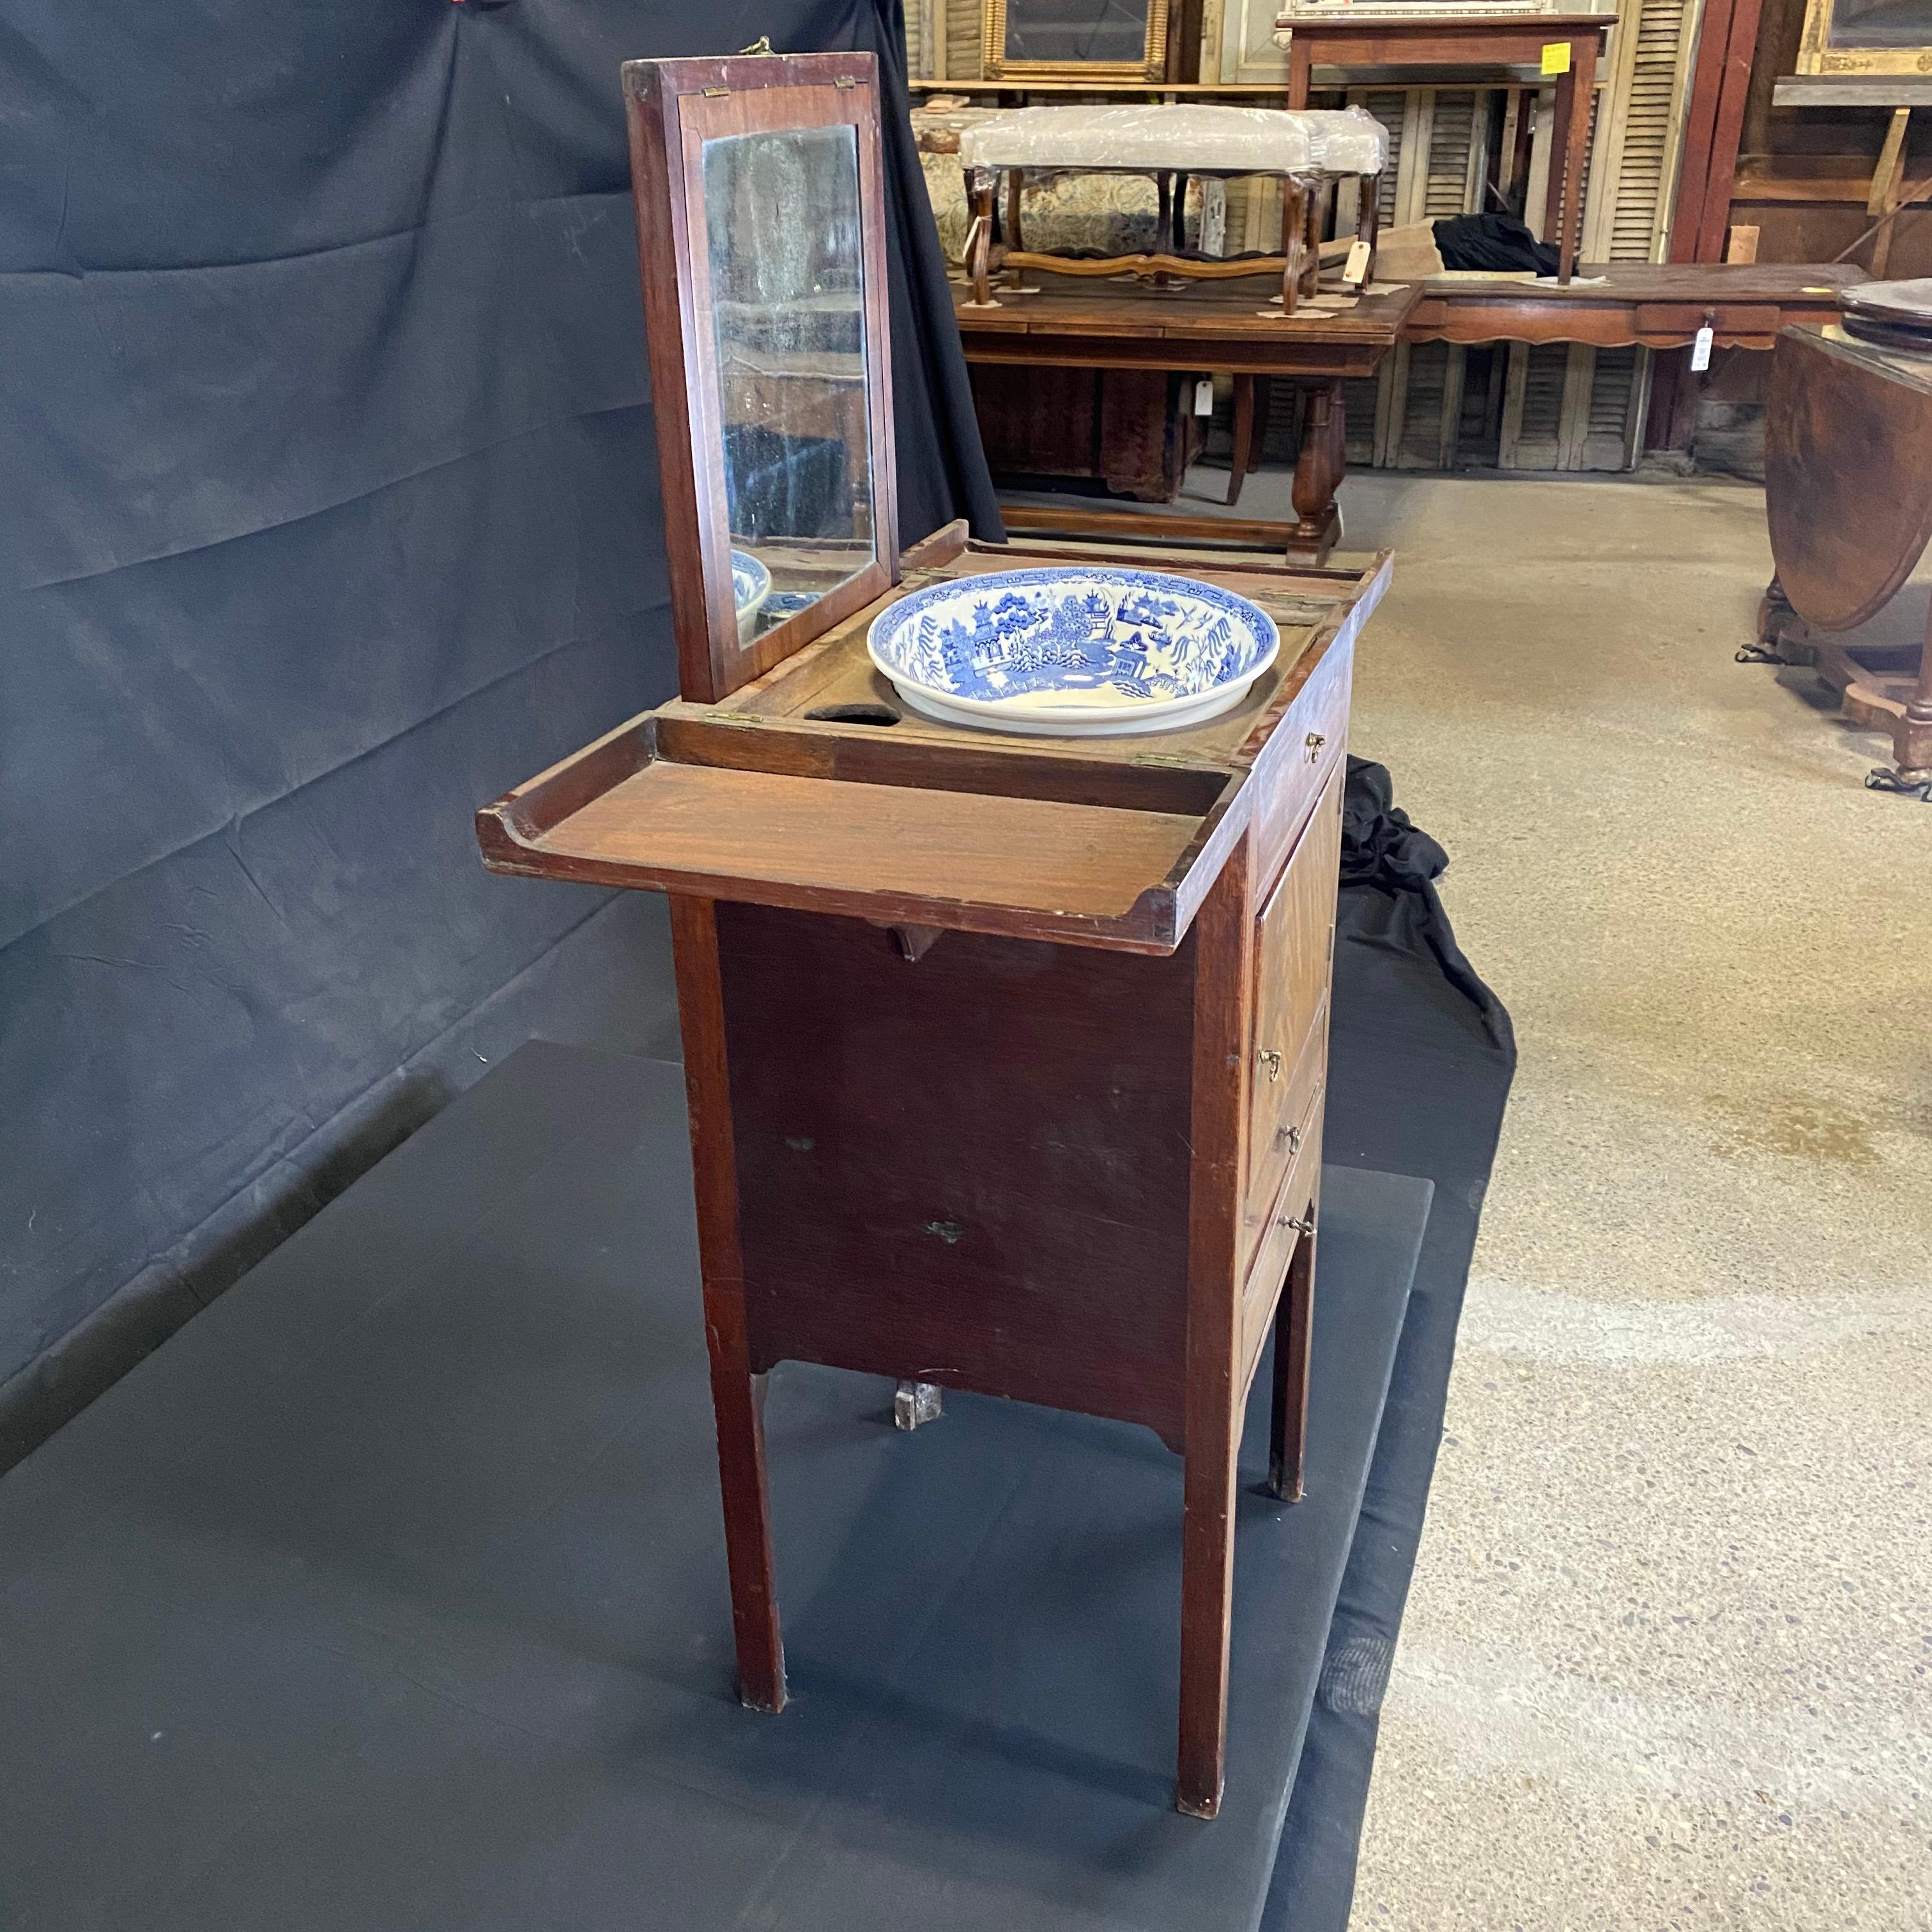 Antique quality Georgian walnut washstand, nightstand or bedside table circa 1810. Great rare item with center British Willow ware washbowl and one of two cups (not original to the piece), over a faux drawer, cabinet with a door, and two drawers